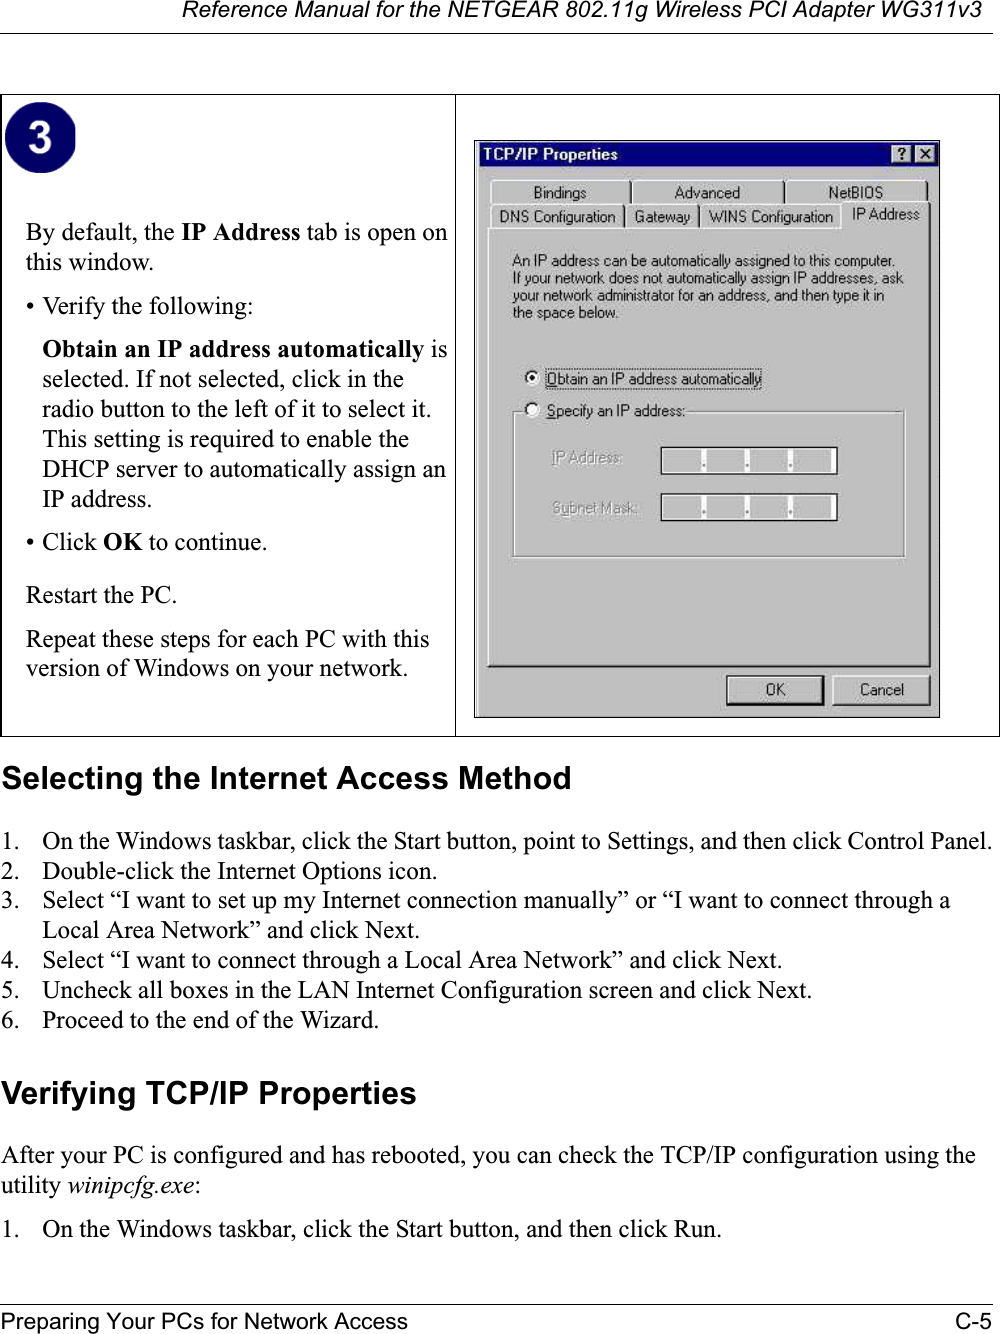 Reference Manual for the NETGEAR 802.11g Wireless PCI Adapter WG311v3Preparing Your PCs for Network Access C-5Selecting the Internet Access Method1. On the Windows taskbar, click the Start button, point to Settings, and then click Control Panel.2. Double-click the Internet Options icon.3. Select “I want to set up my Internet connection manually” or “I want to connect through a Local Area Network” and click Next.4. Select “I want to connect through a Local Area Network” and click Next.5. Uncheck all boxes in the LAN Internet Configuration screen and click Next.6. Proceed to the end of the Wizard.Verifying TCP/IP PropertiesAfter your PC is configured and has rebooted, you can check the TCP/IP configuration using the utility winipcfg.exe:1. On the Windows taskbar, click the Start button, and then click Run.By default, the IP Address tab is open on this window.• Verify the following:Obtain an IP address automatically isselected. If not selected, click in the radio button to the left of it to select it.  This setting is required to enable the DHCP server to automatically assign an IP address. • Click OK to continue.Restart the PC.Repeat these steps for each PC with this version of Windows on your network.